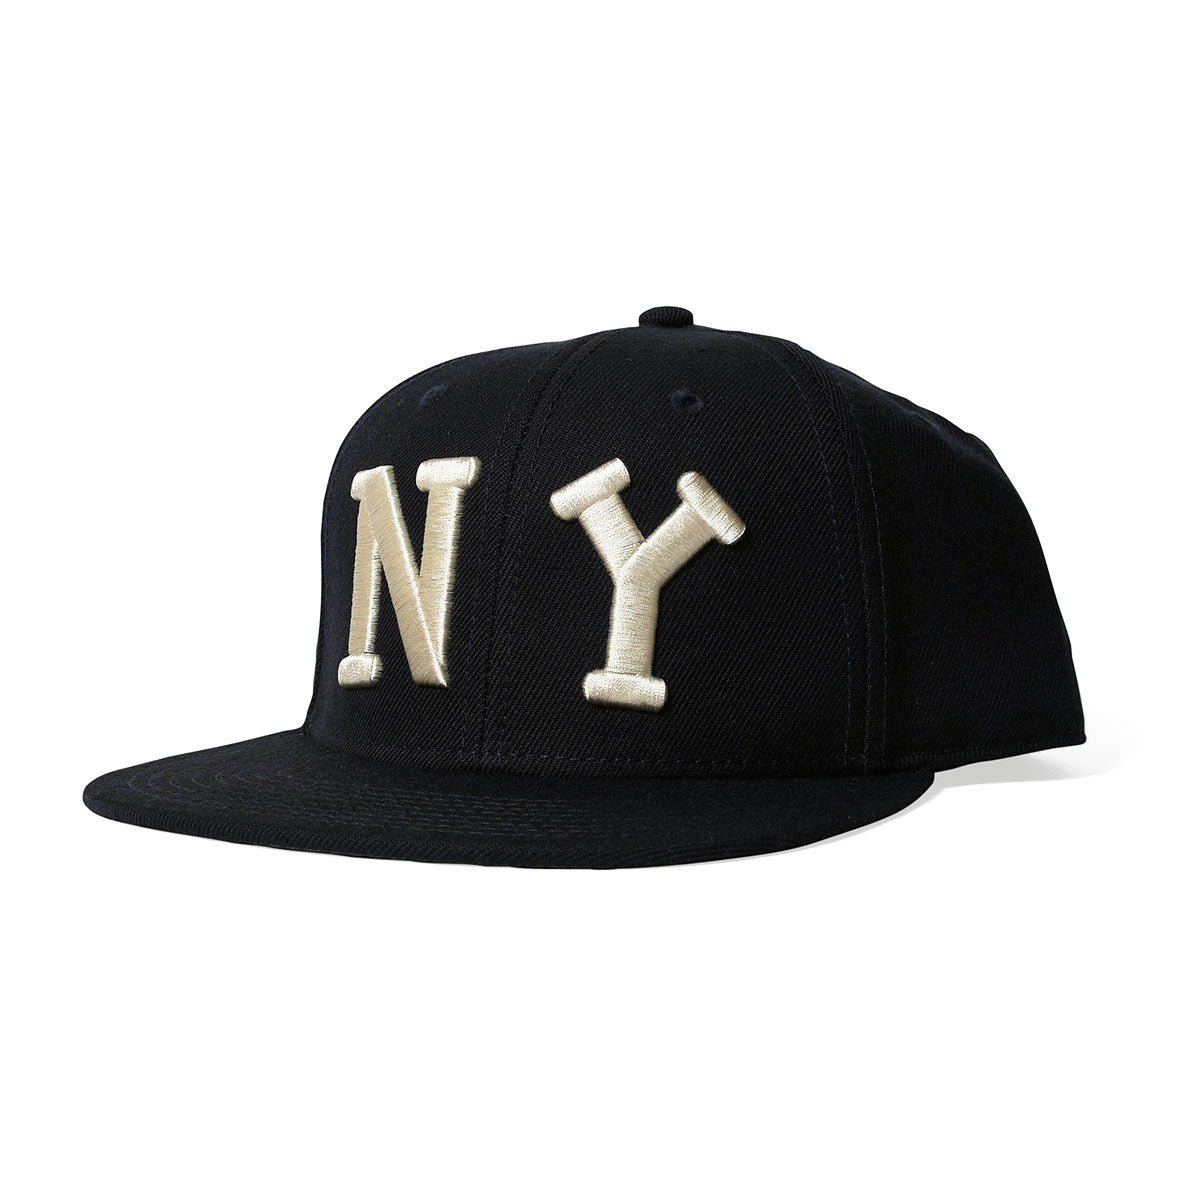 AMERICAN NEEDLE Archive 400 - NY Black Yankees【21006BNBY】